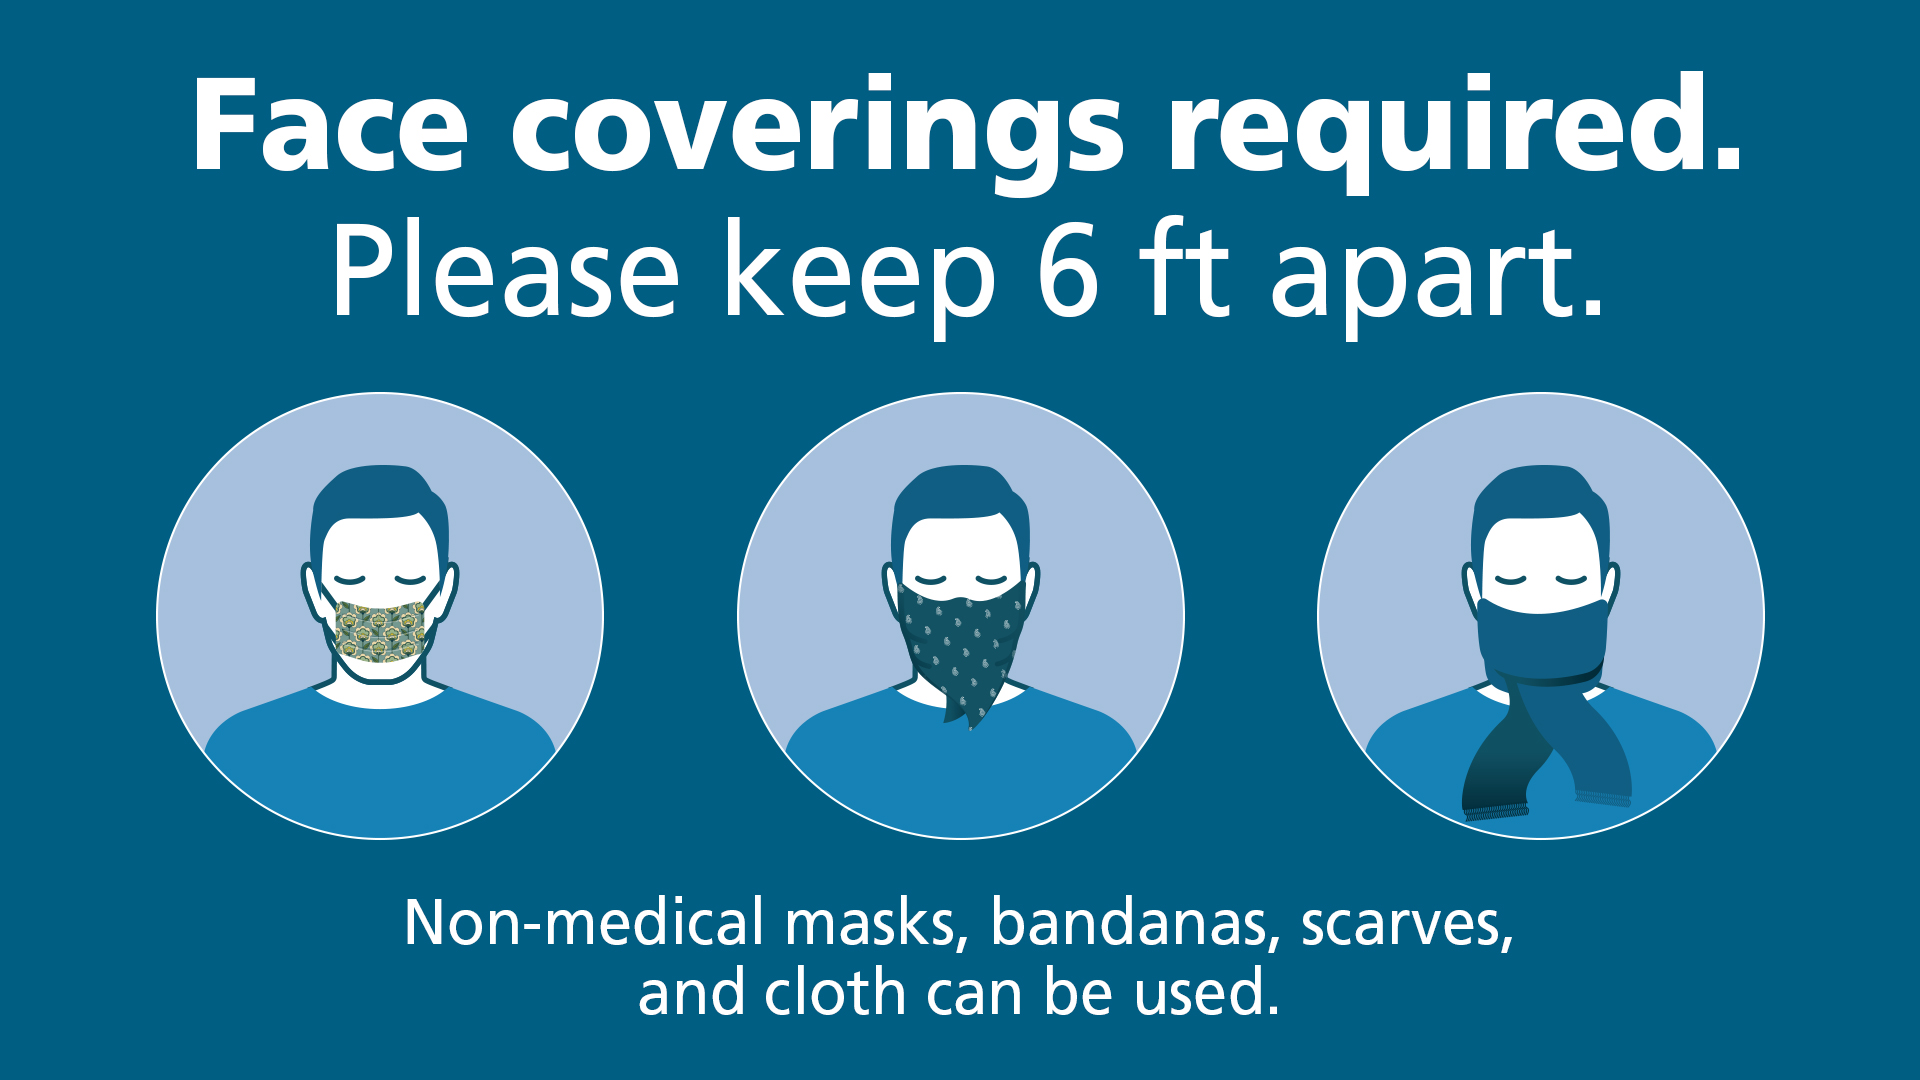 Face coverings required. Non-medical masks, bandanas, scarves, and cloth can be used.